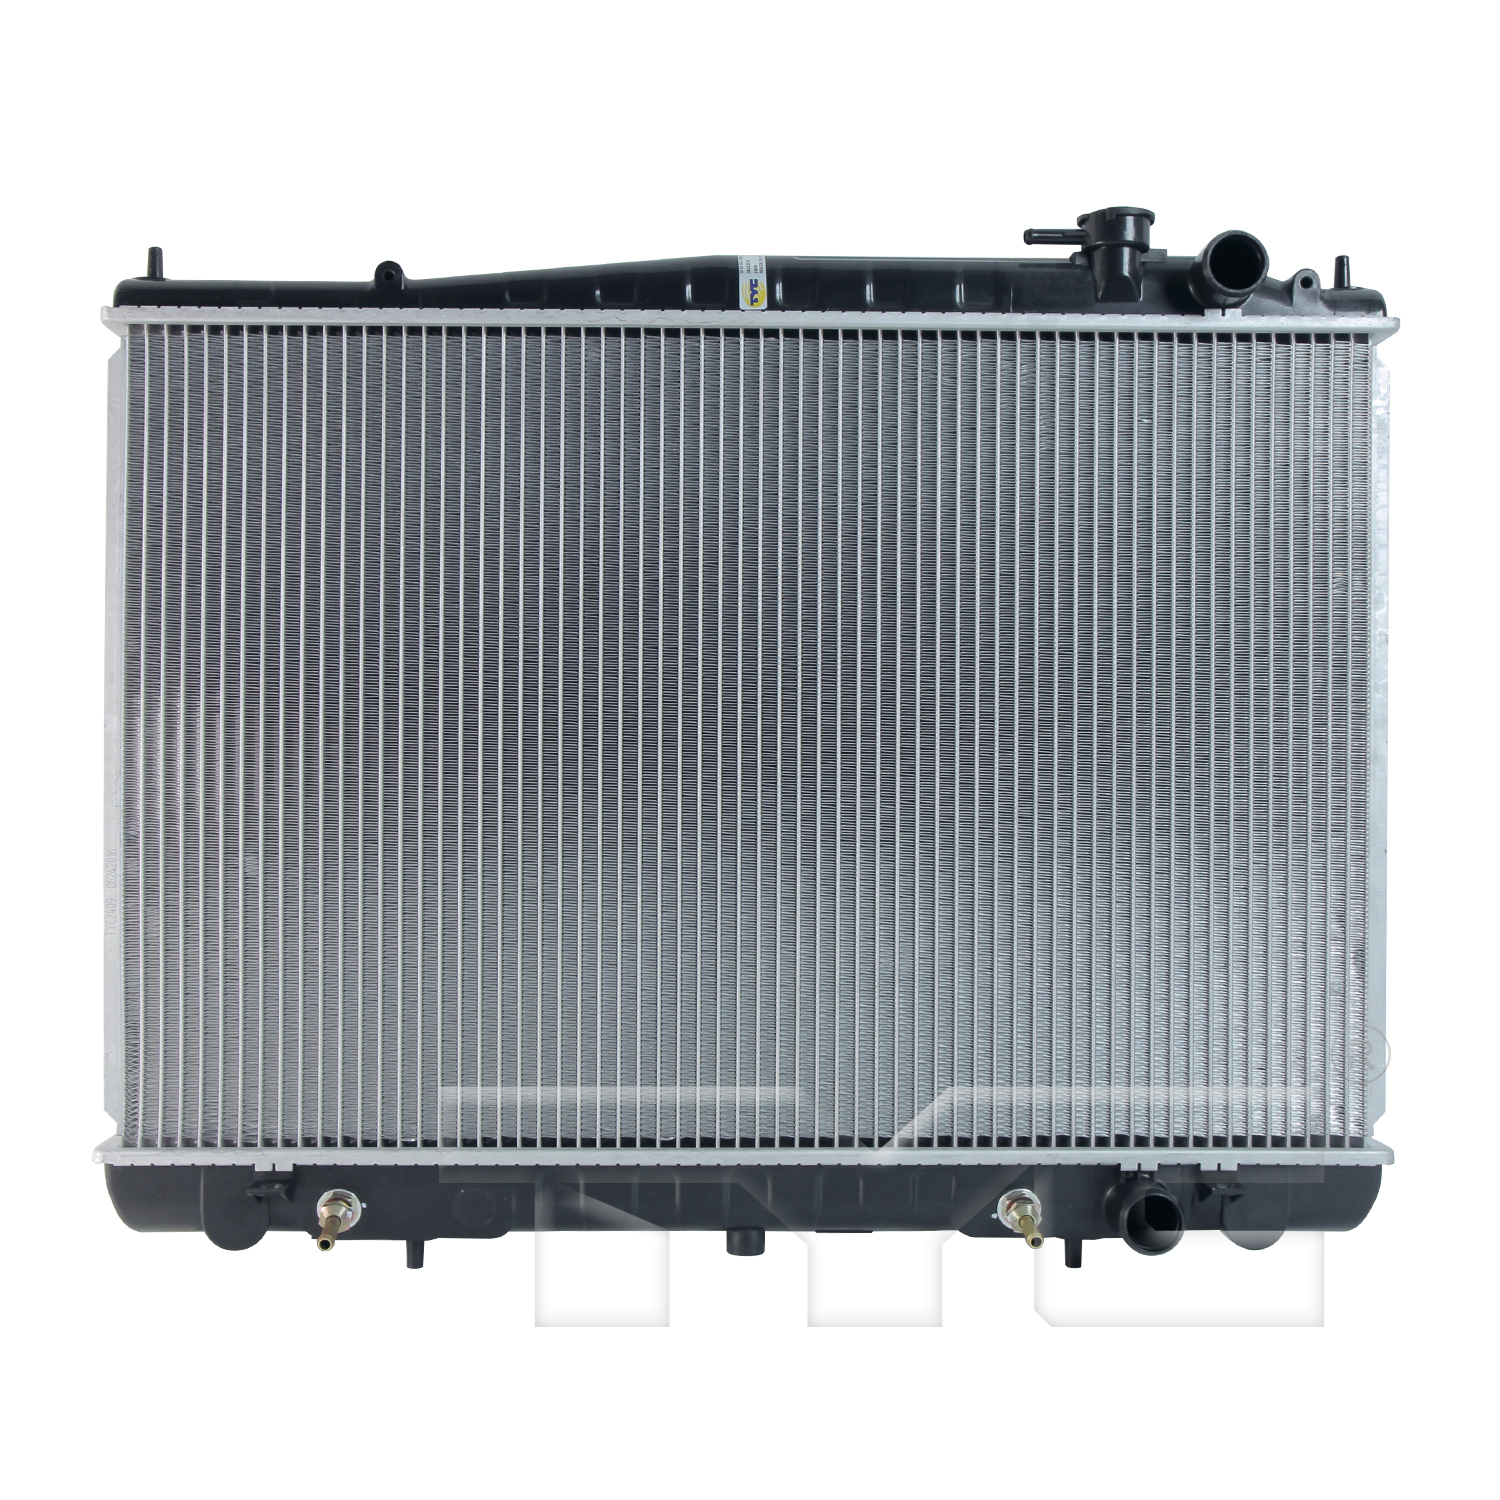 Aftermarket RADIATORS for NISSAN - FRONTIER, FRONTIER,01-04,Radiator assembly